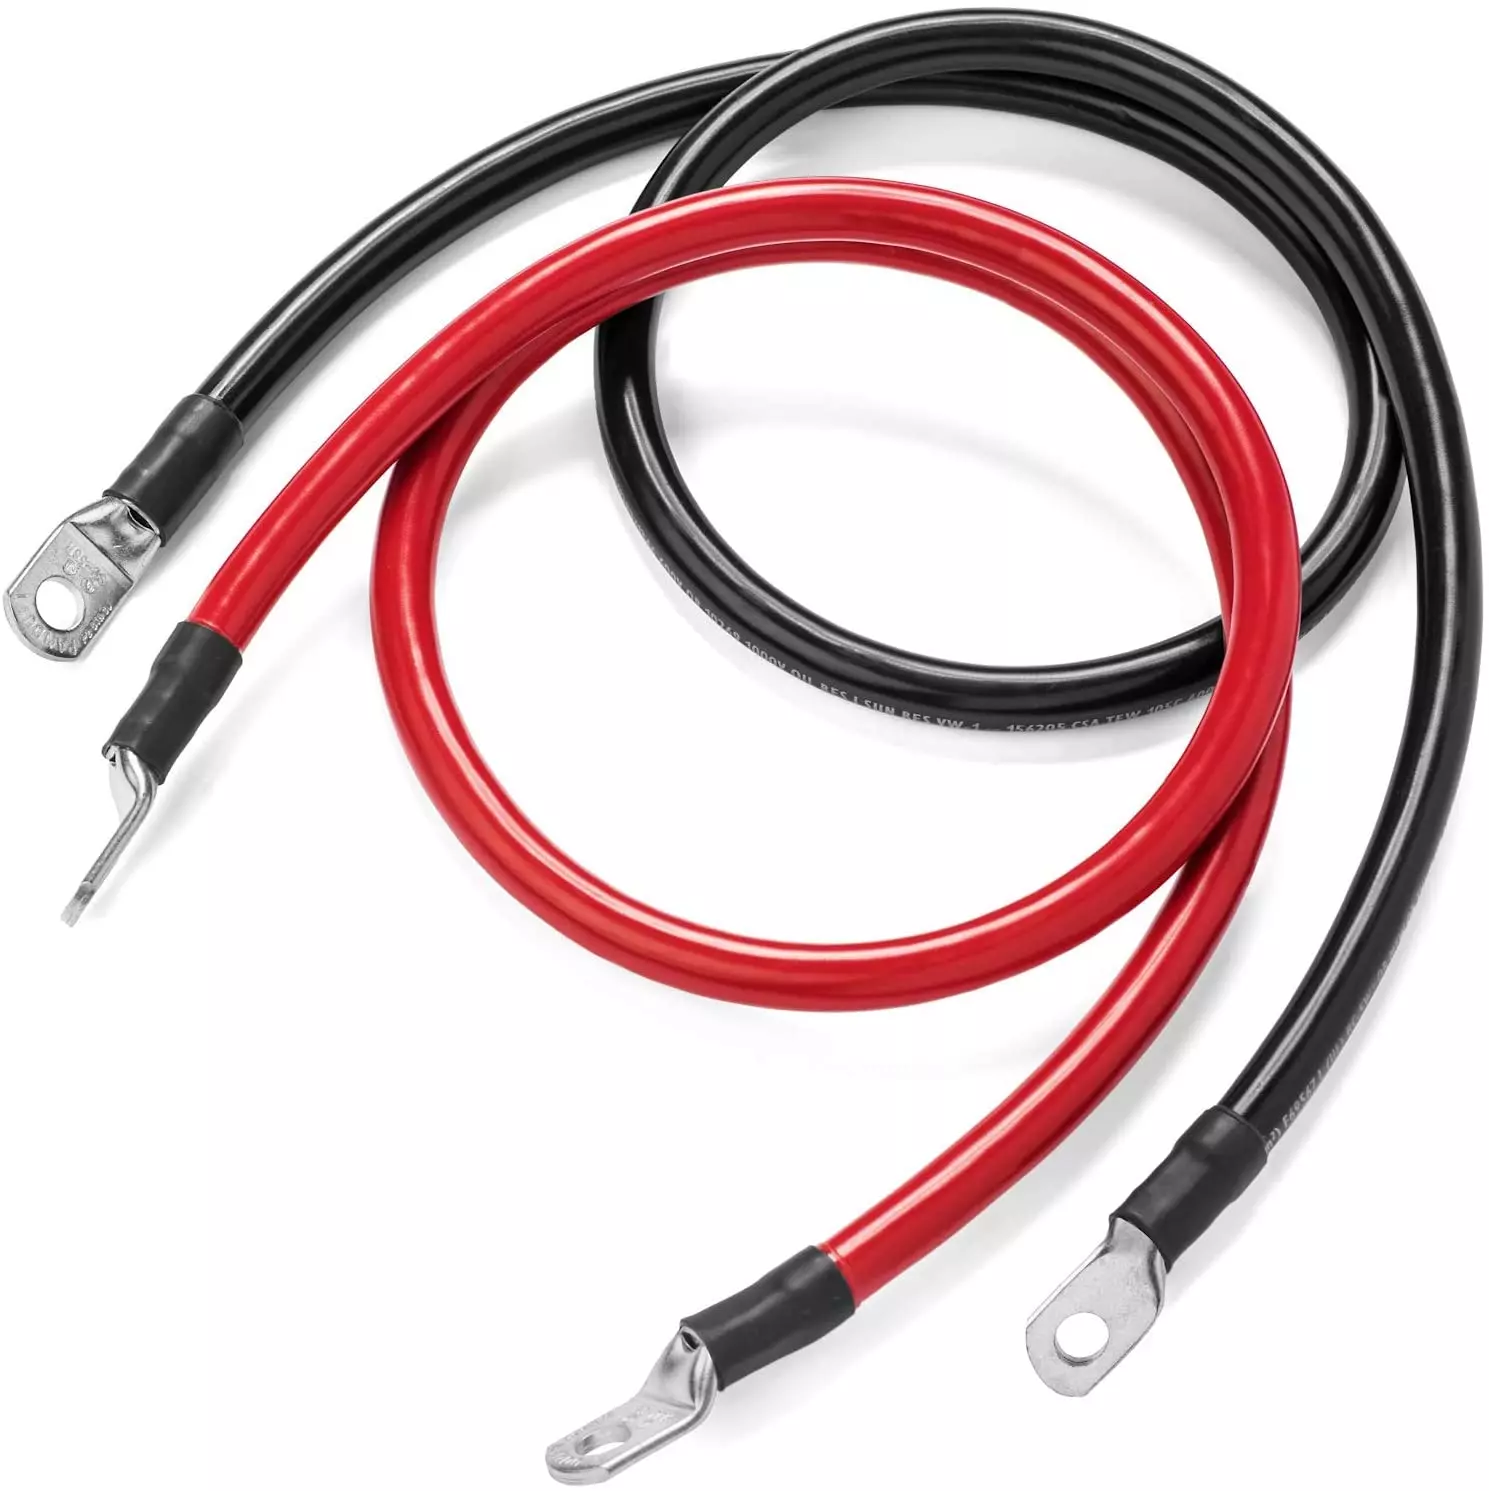 Spartan Power Battery Cables